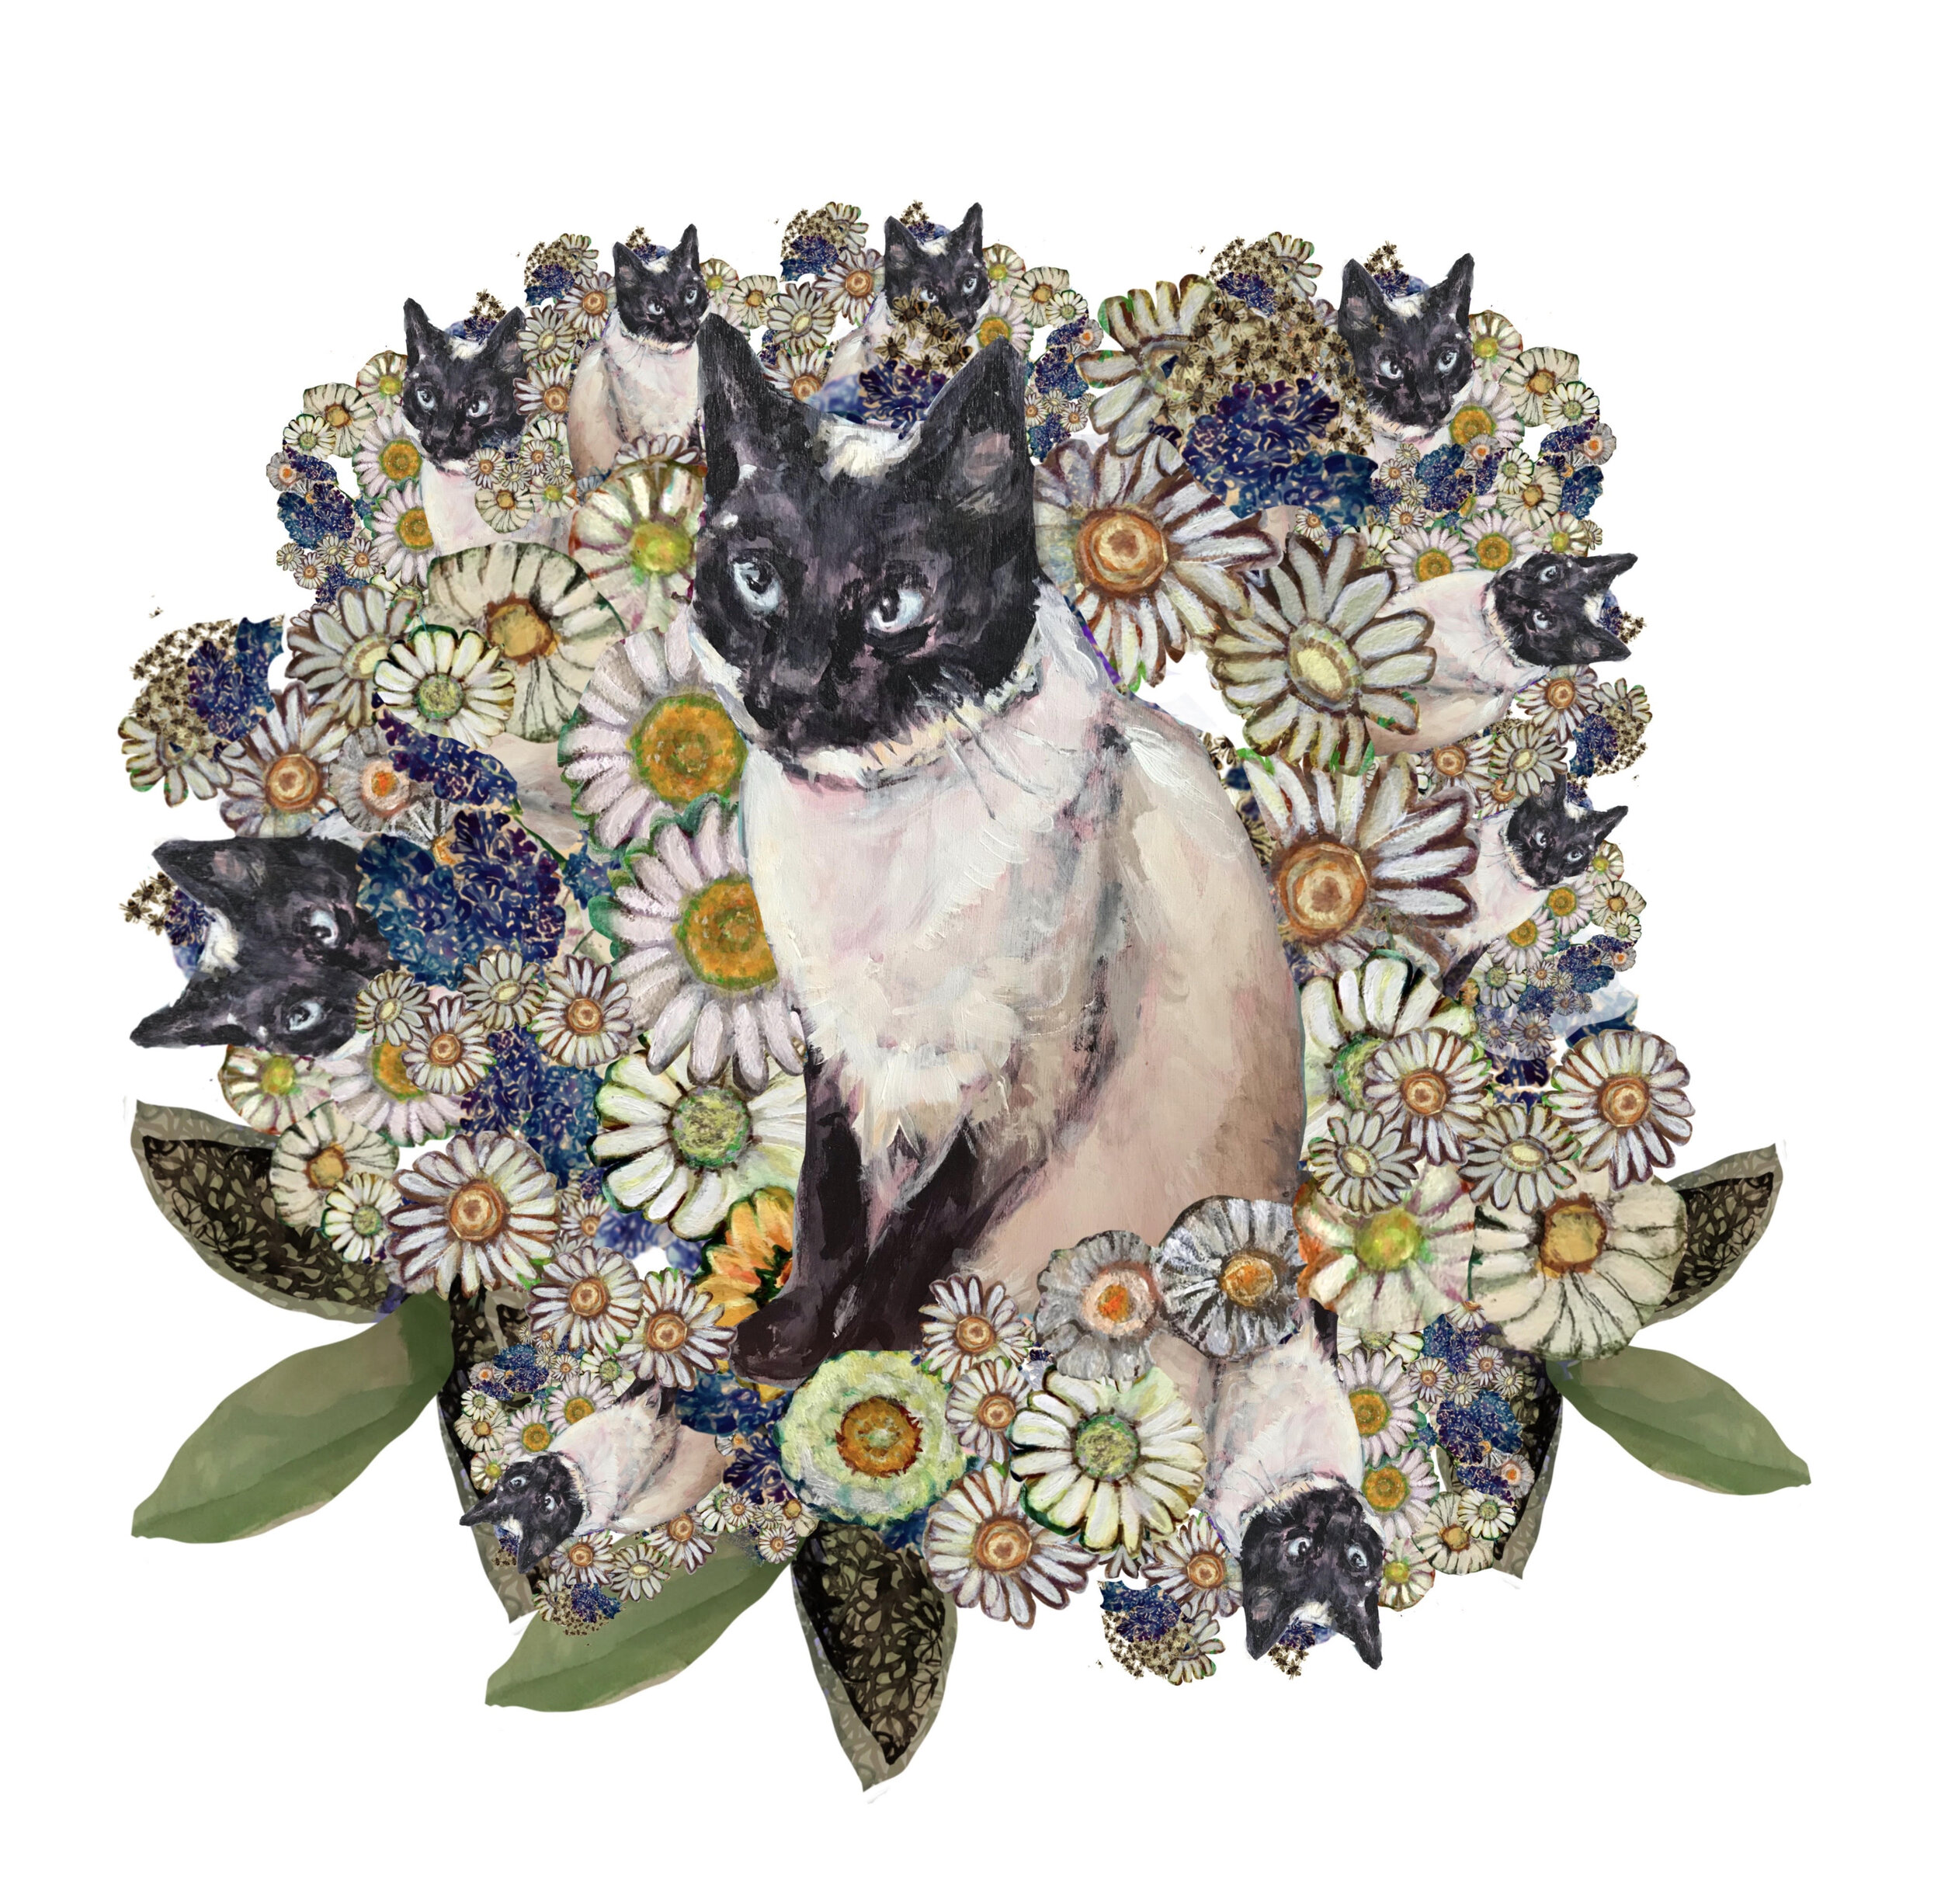  “La Belle”  12 x 12 inches, Giclée print stretched on canvas, Artist proof,  $400  Cat and flower kaleidoscope  